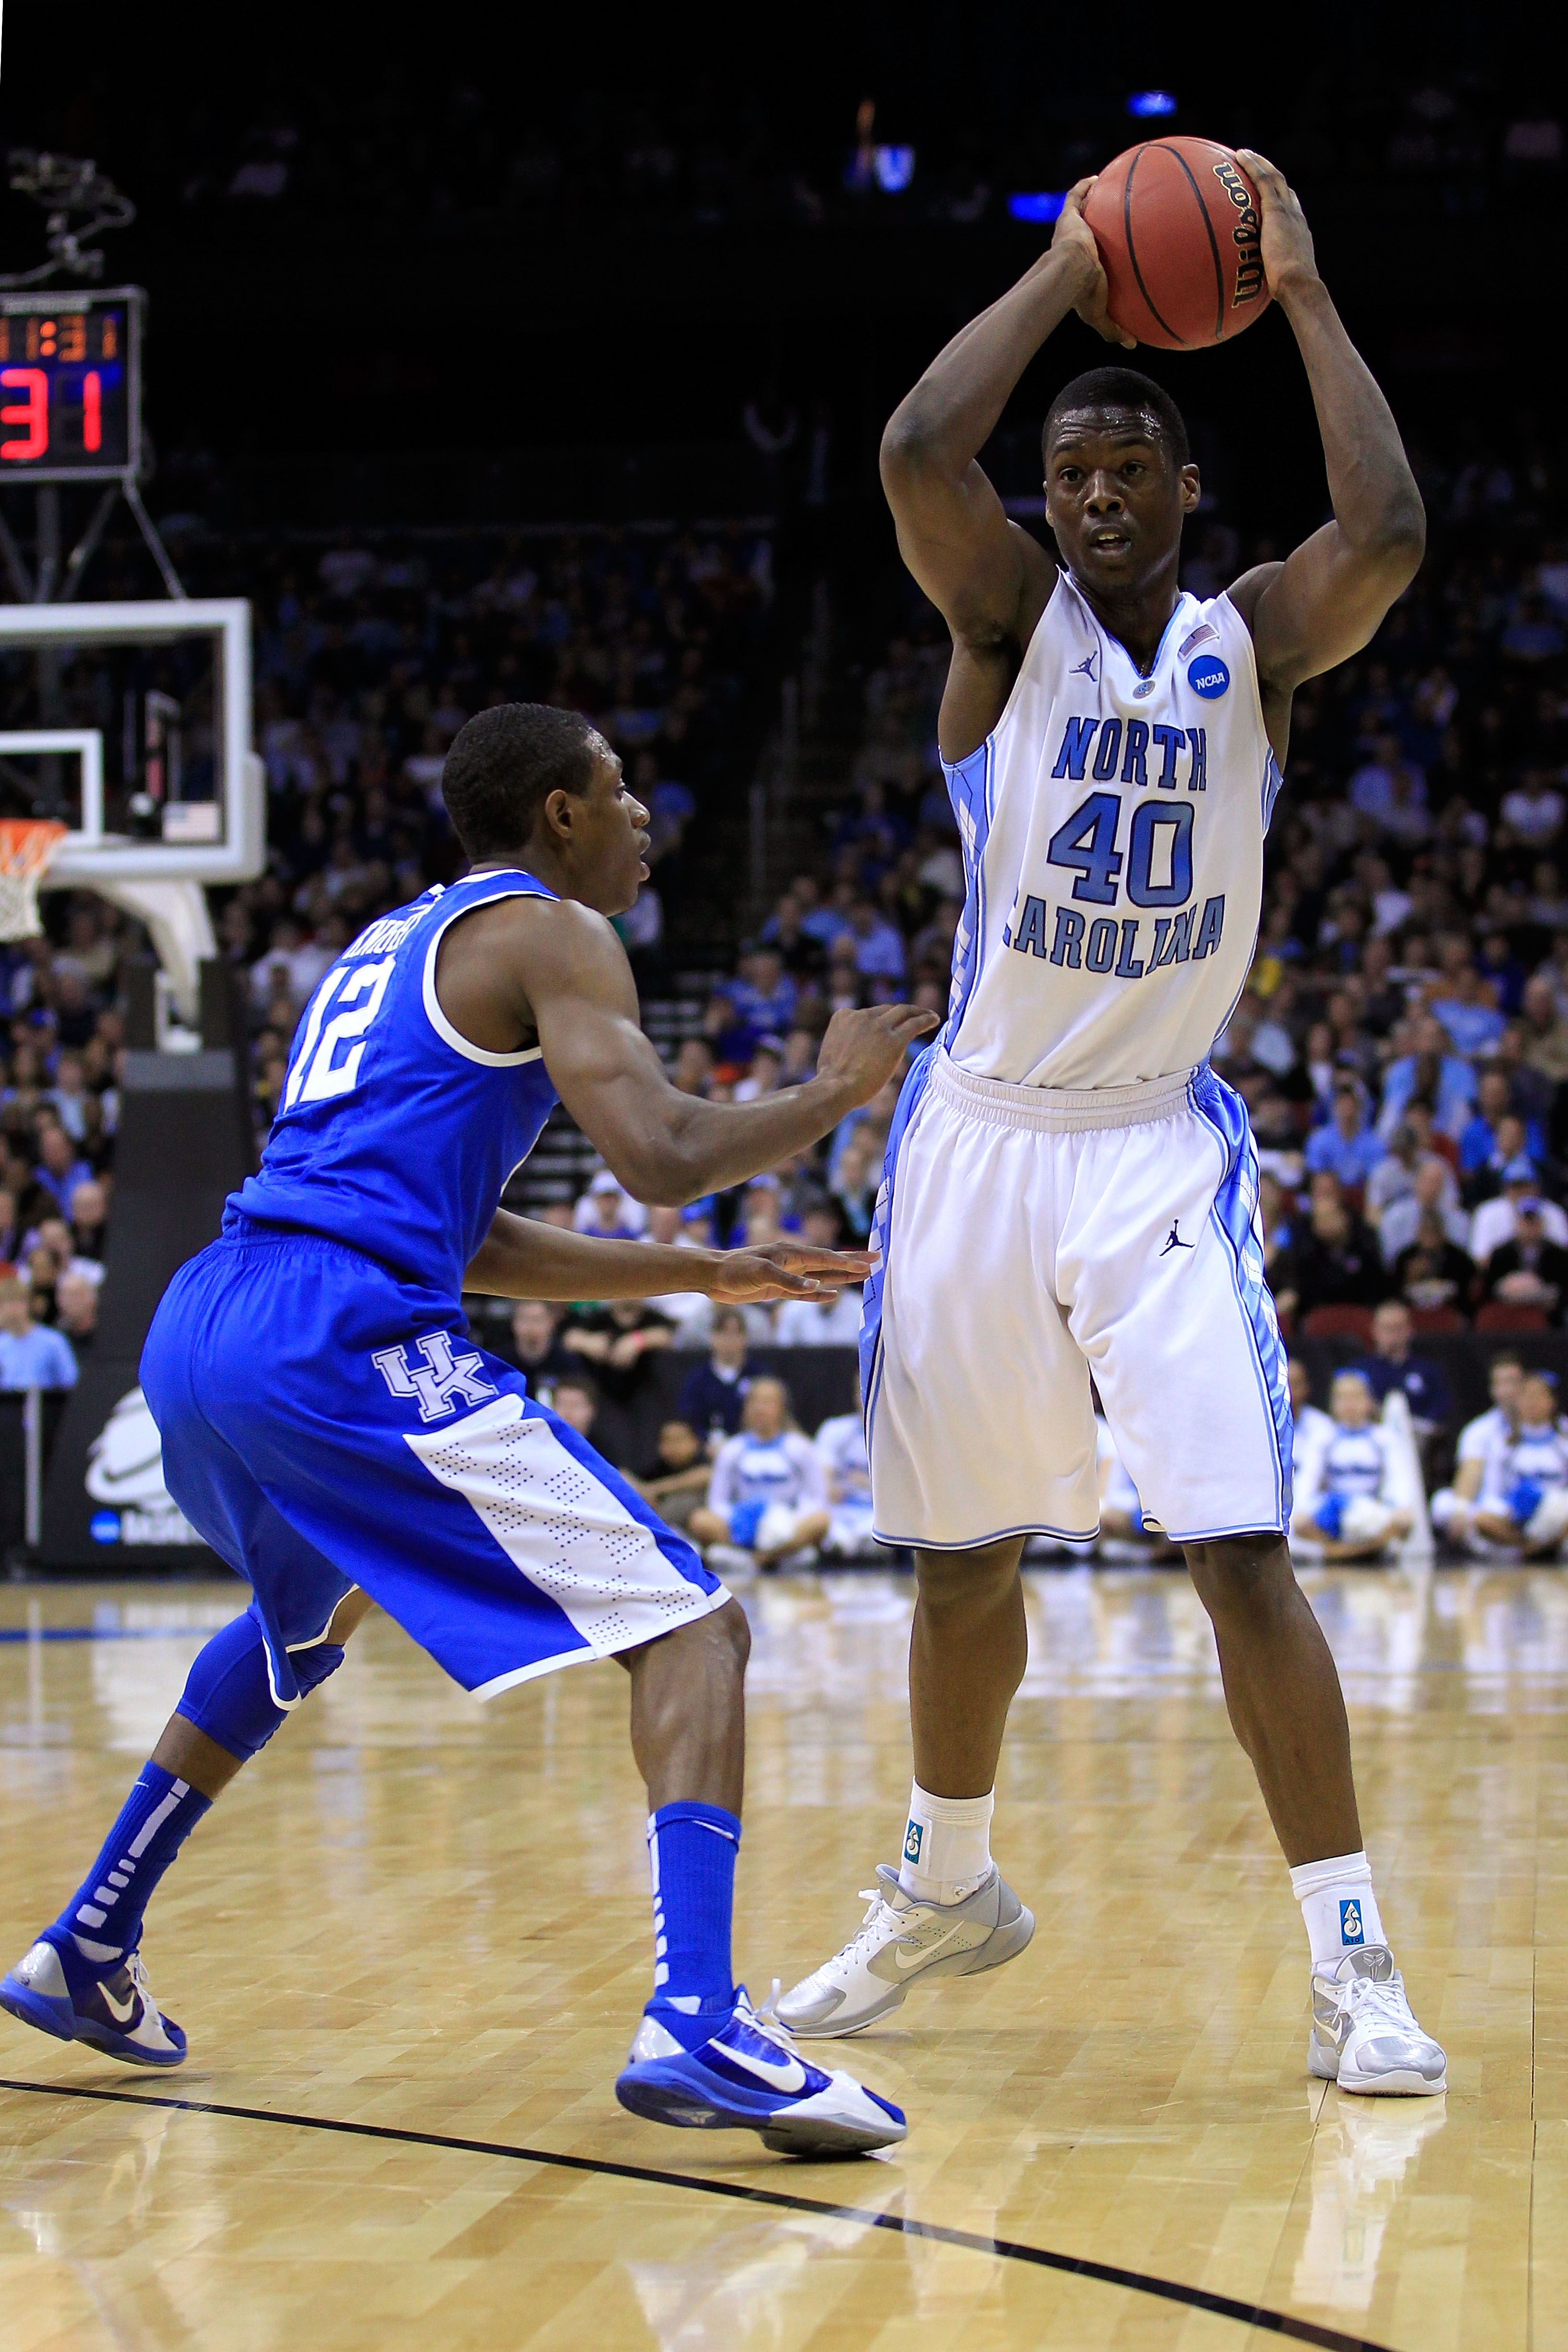 NEWARK, NJ - MARCH 27:  Harrison Barnes #40 of the North Carolina Tar Heels in action against Brandon Knight #12 of the Kentucky Wildcats during the east regional final of the 2011 NCAA men's basketball tournament at Prudential Center on March 27, 2011 in